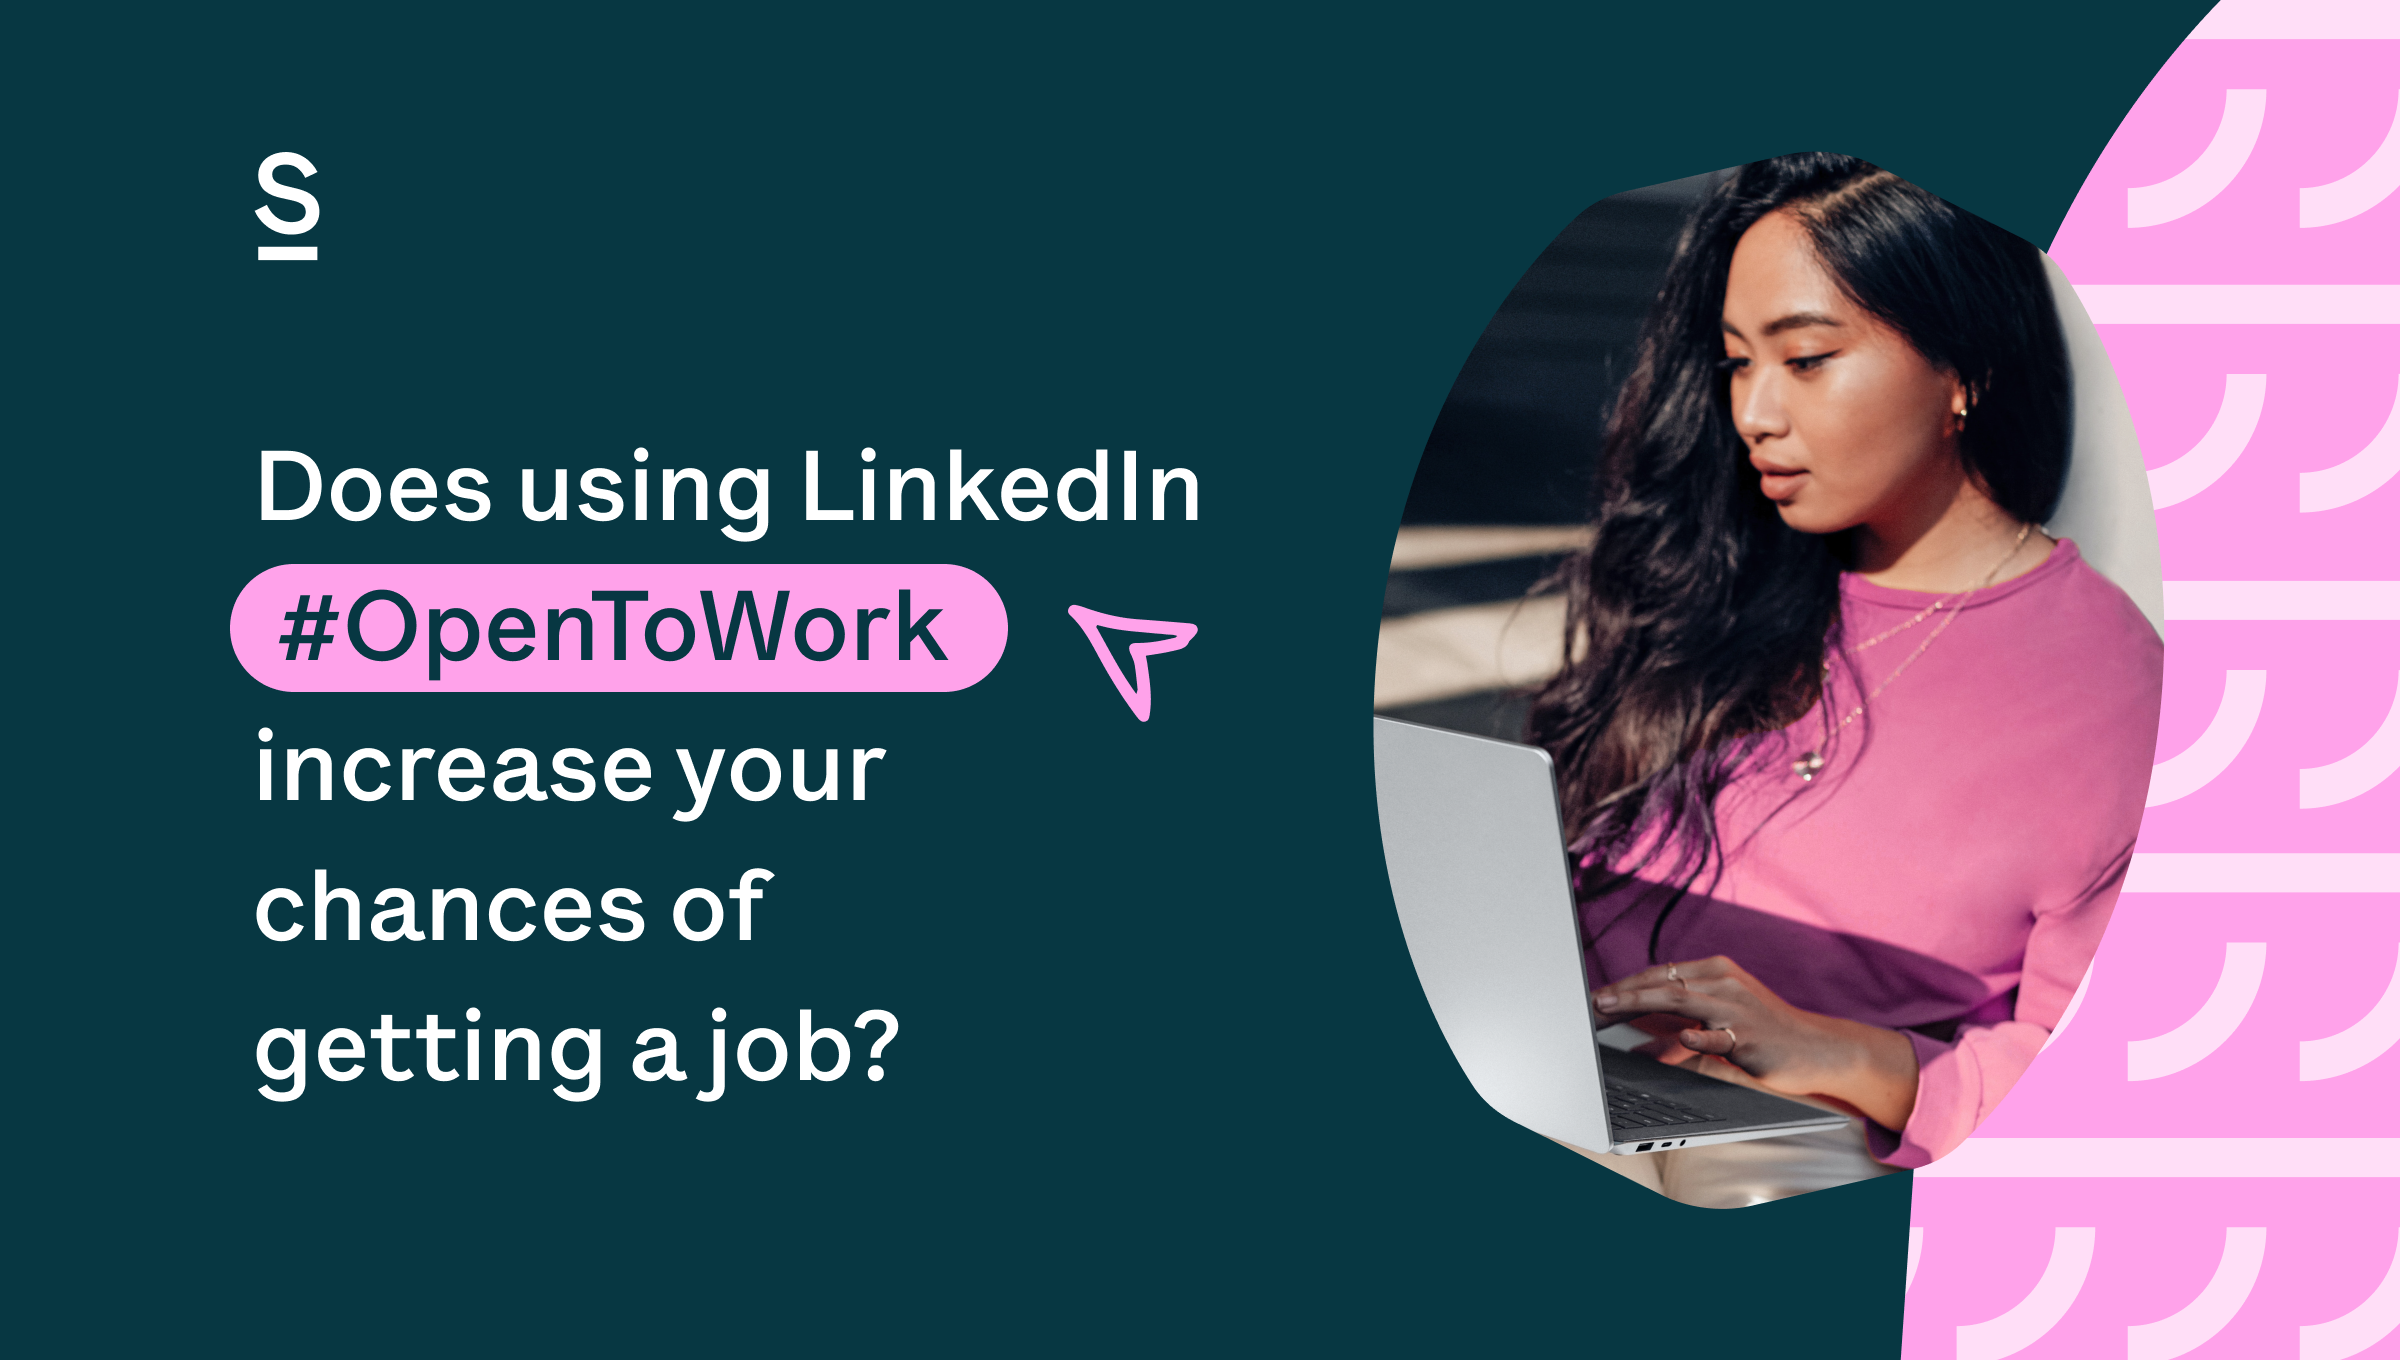 What is LinkedIn and how does it work?